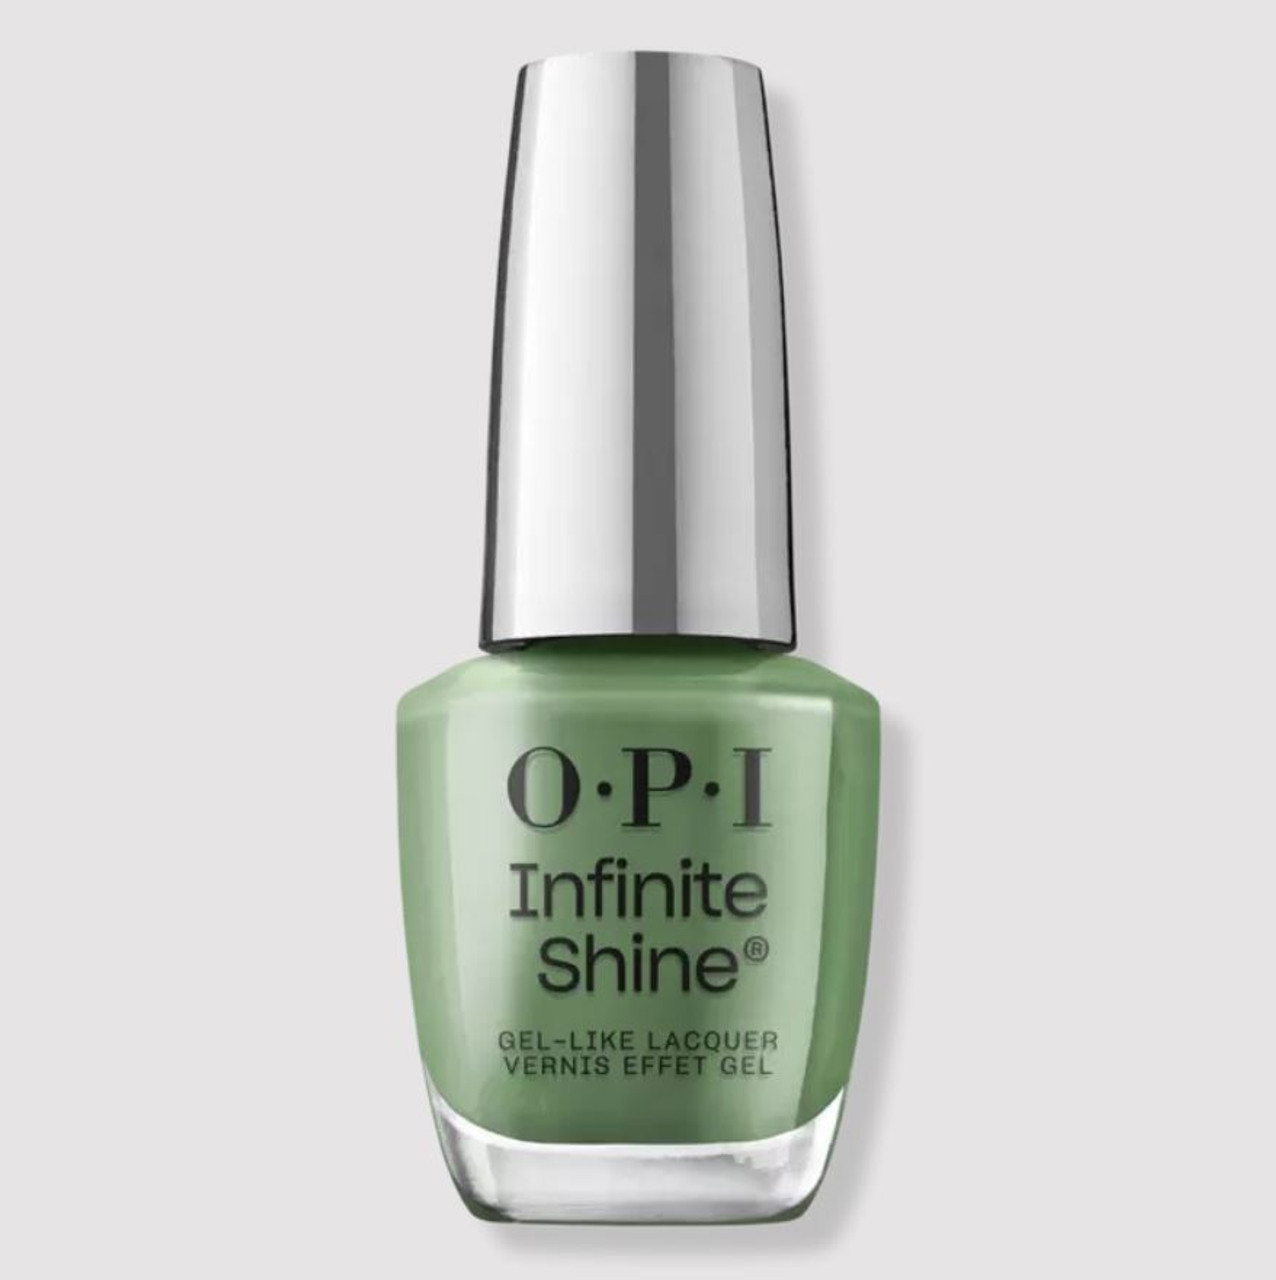 OPI Infinite Shine Happily Evergreen After - .5 Oz / 15 mL